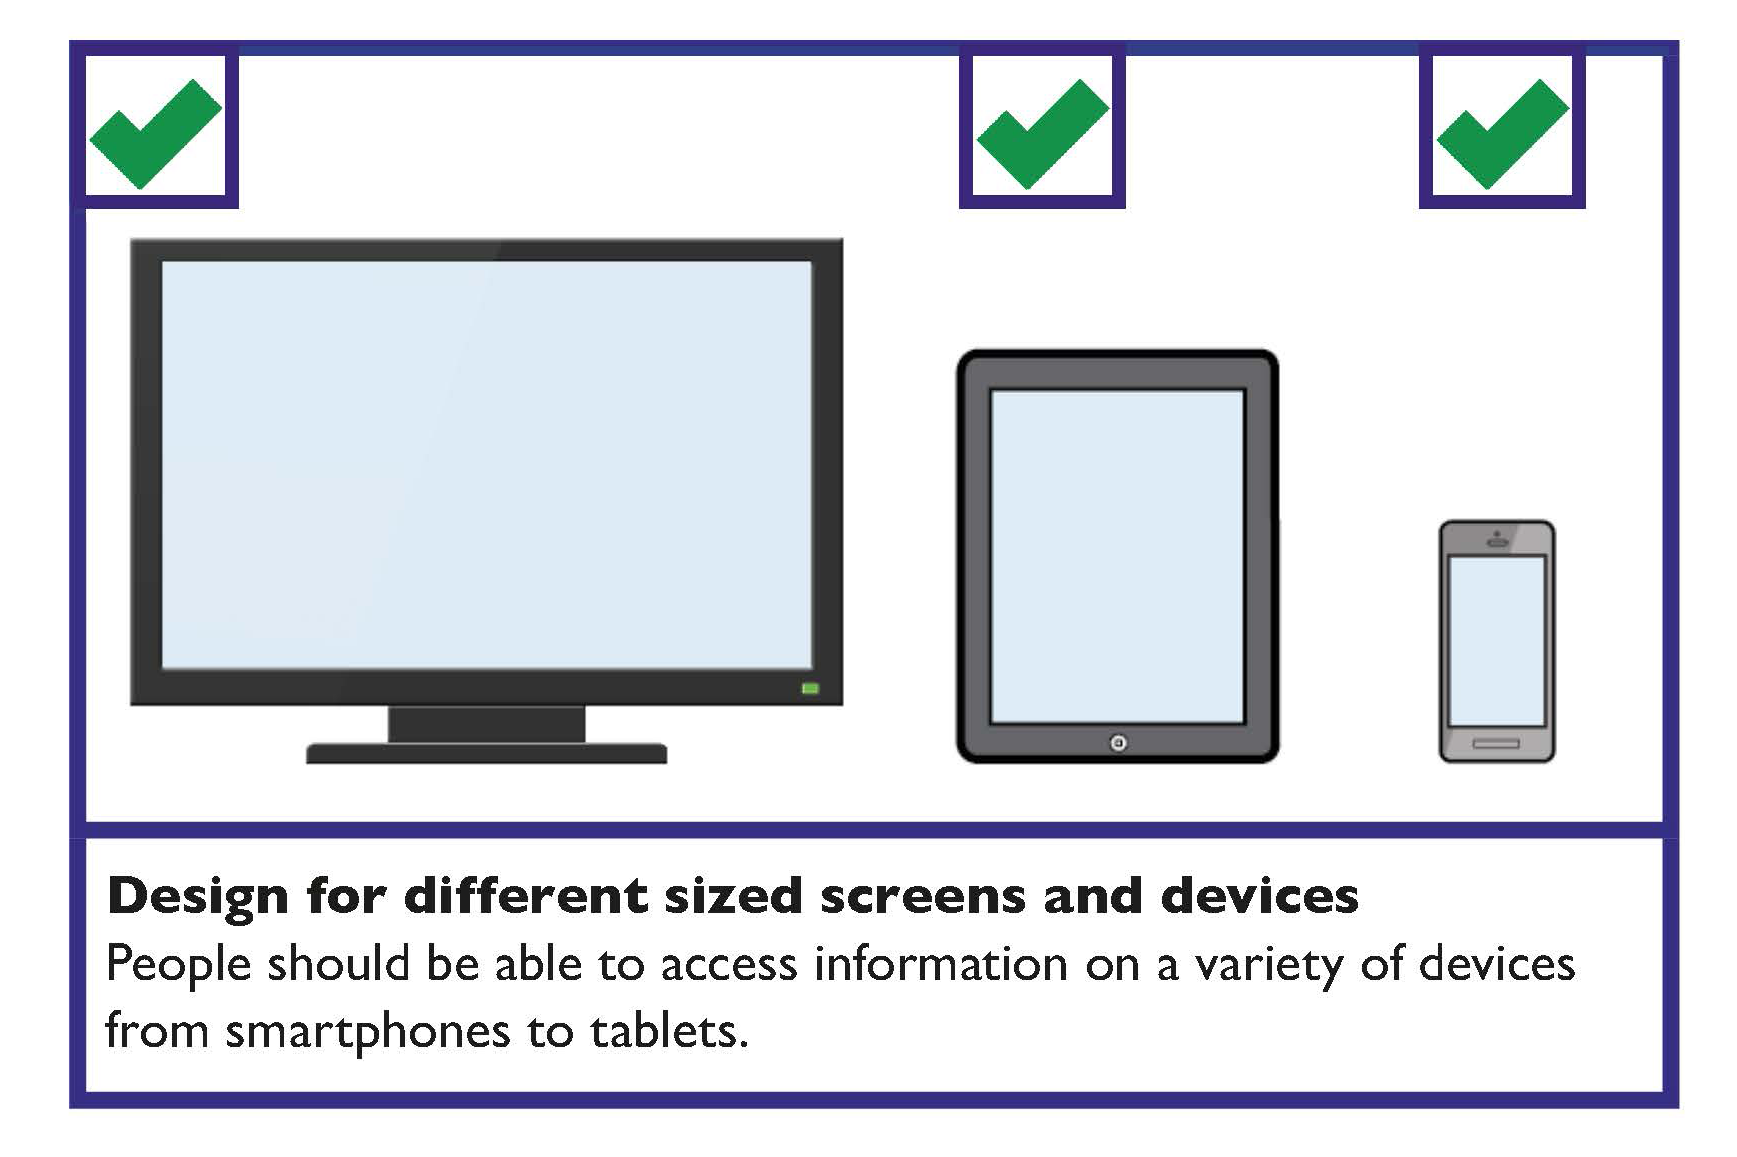 Design for different size screens and devices. People should be able to access information on a variety of devices, from smartphones to tablets.